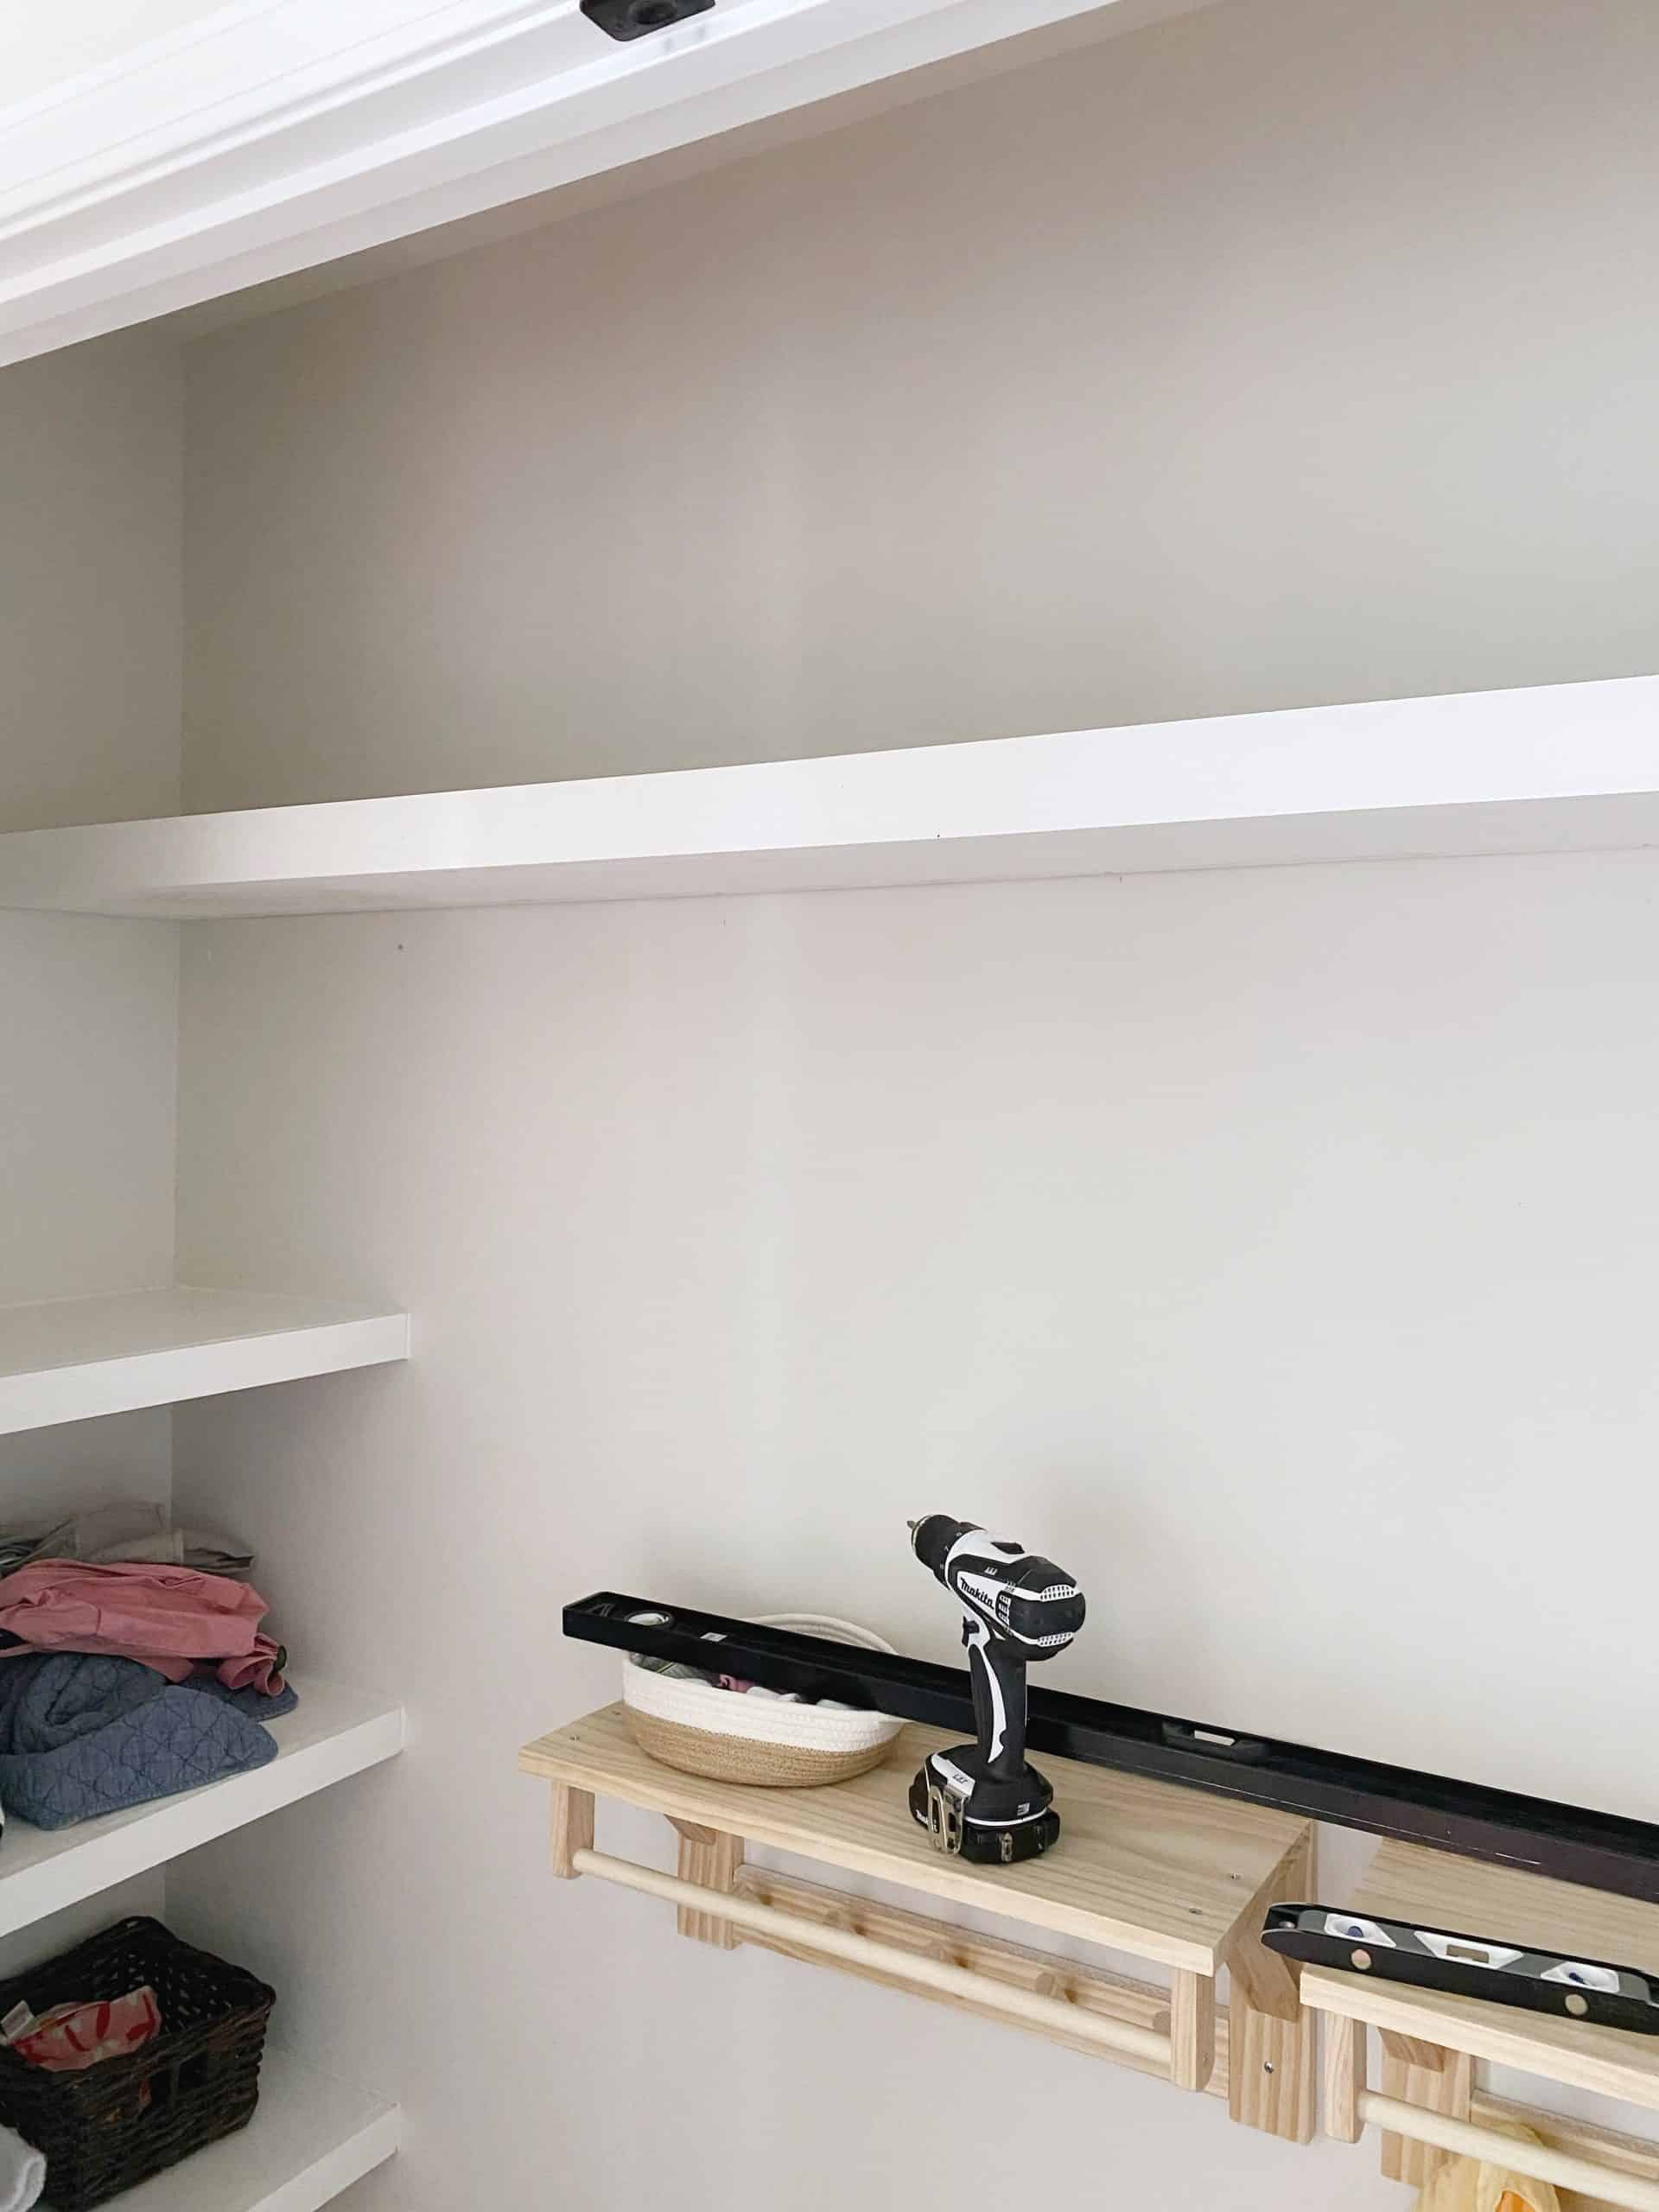 Make the most of your closet space by installing custom floating shelving. Learn more about this beginner-friendly DIY project at www.freeandunfettered.com. #homeorganization #closetorganization #diyshelf #diyhome #modernhome 